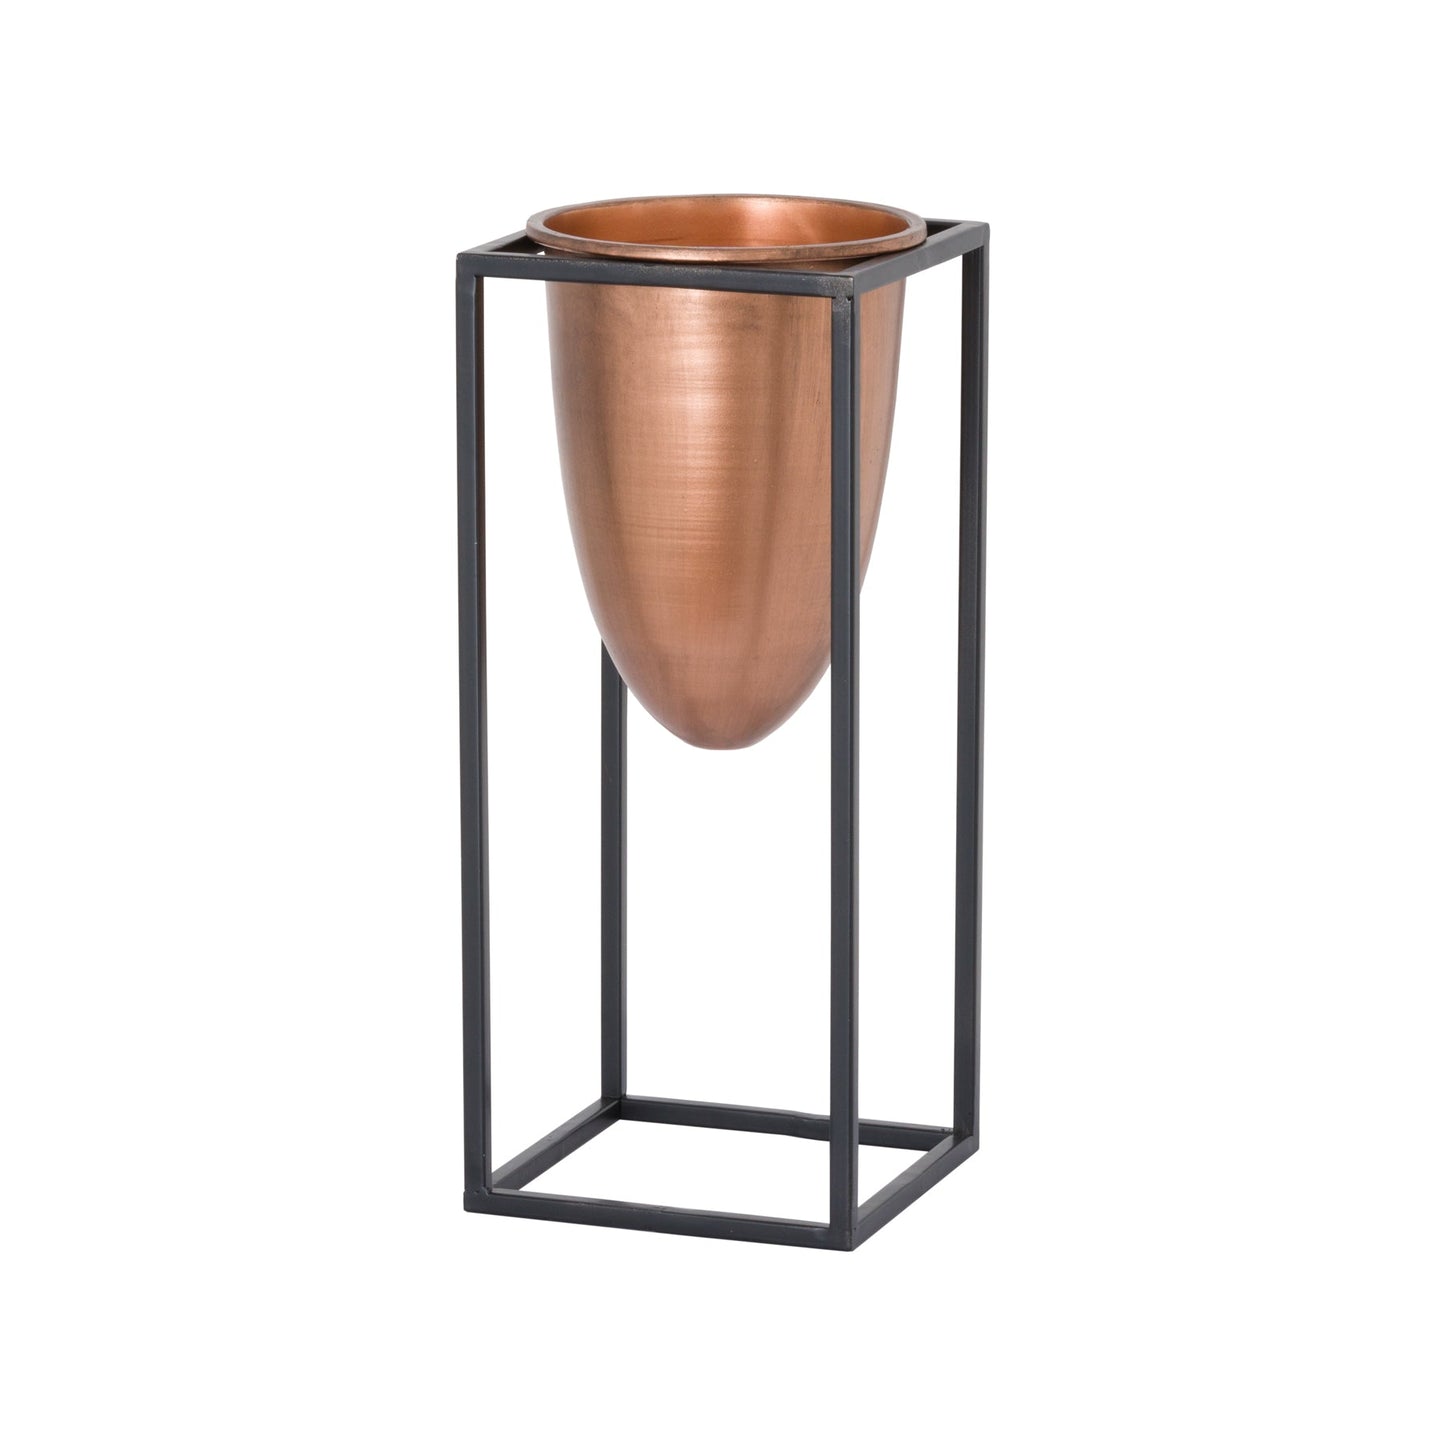 Copper Bullet Planter On Black Frame (19507) By Hill Interiors